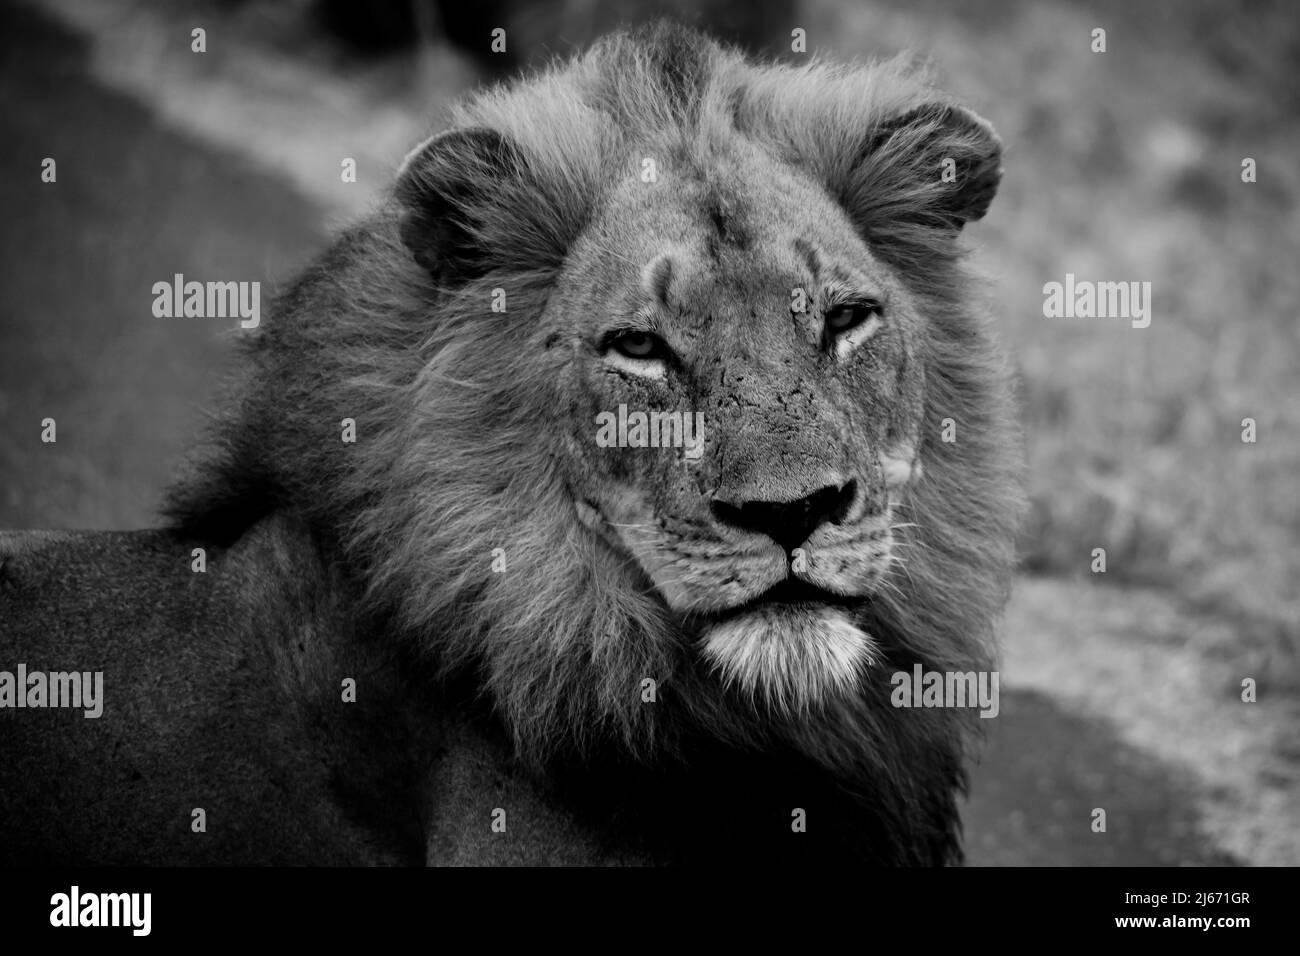 Lion cub Black and White Stock Photos & Images - Alamy